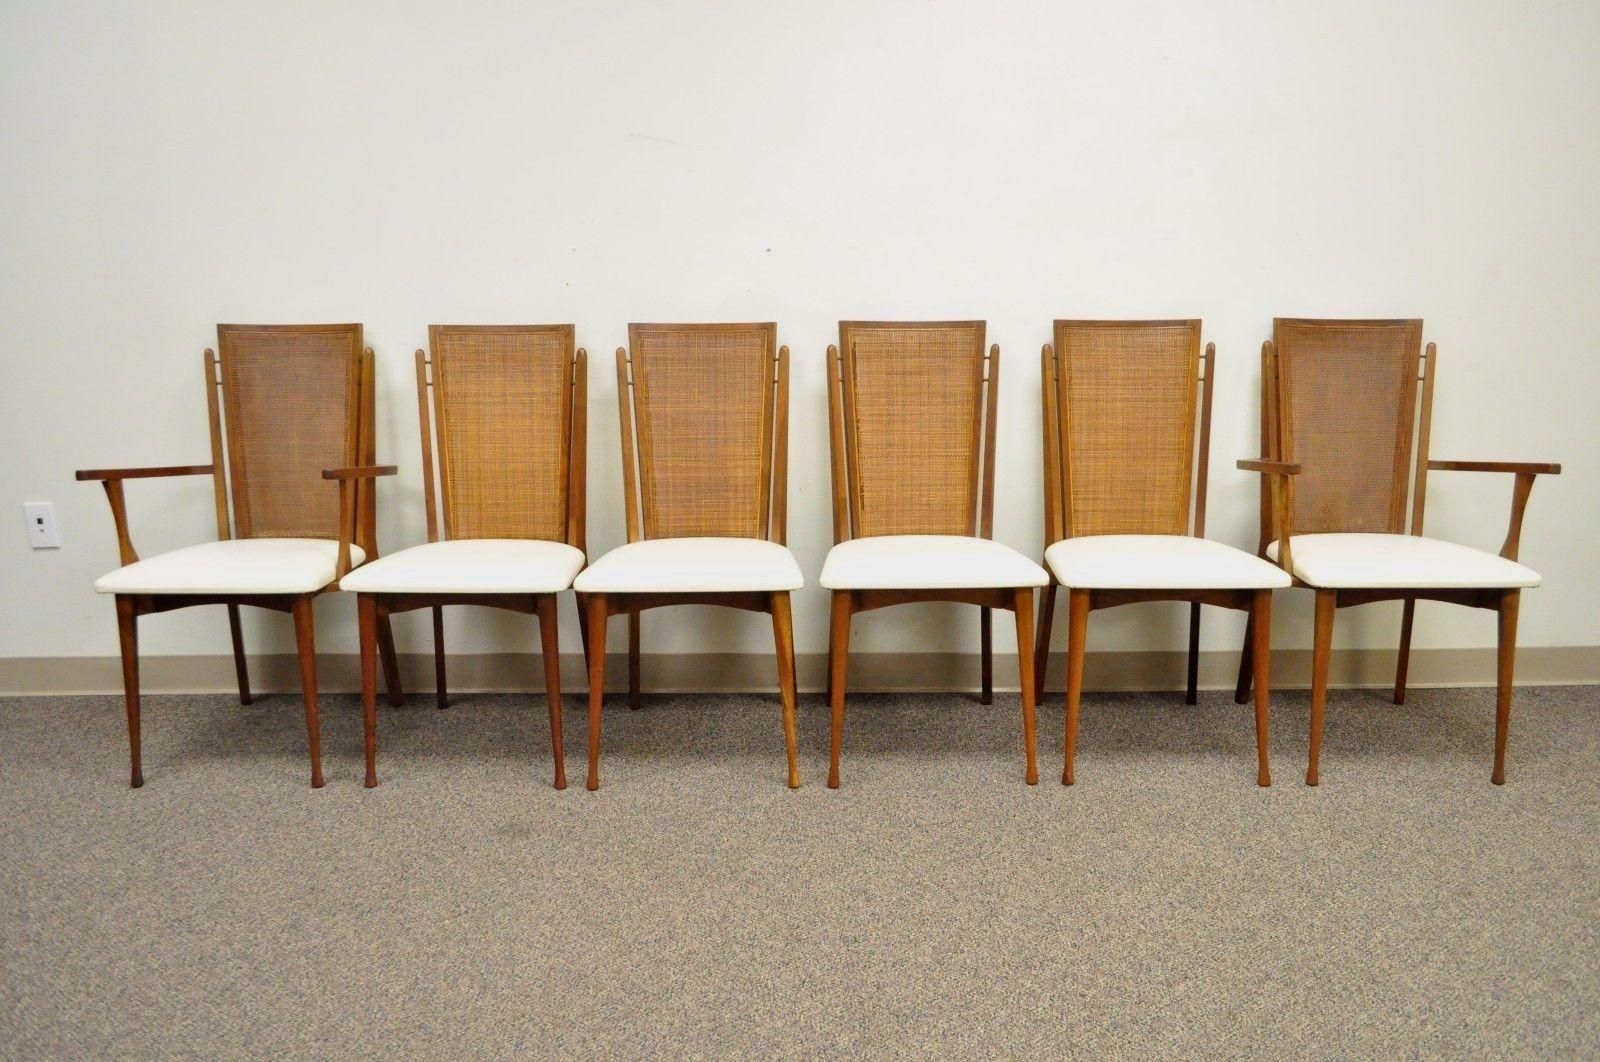 Set of Six vintage Mid-Century Modern Caned Back Dining Chairs by Specialty Woodcraft. Item features 2 Arm Chairs, 4 Side Chairs, Sculptural Solid Teak Frames, Hour Glass Shaped Front Legs, Caned Backs, White Vinyl Upholstery, Original Label. Circa